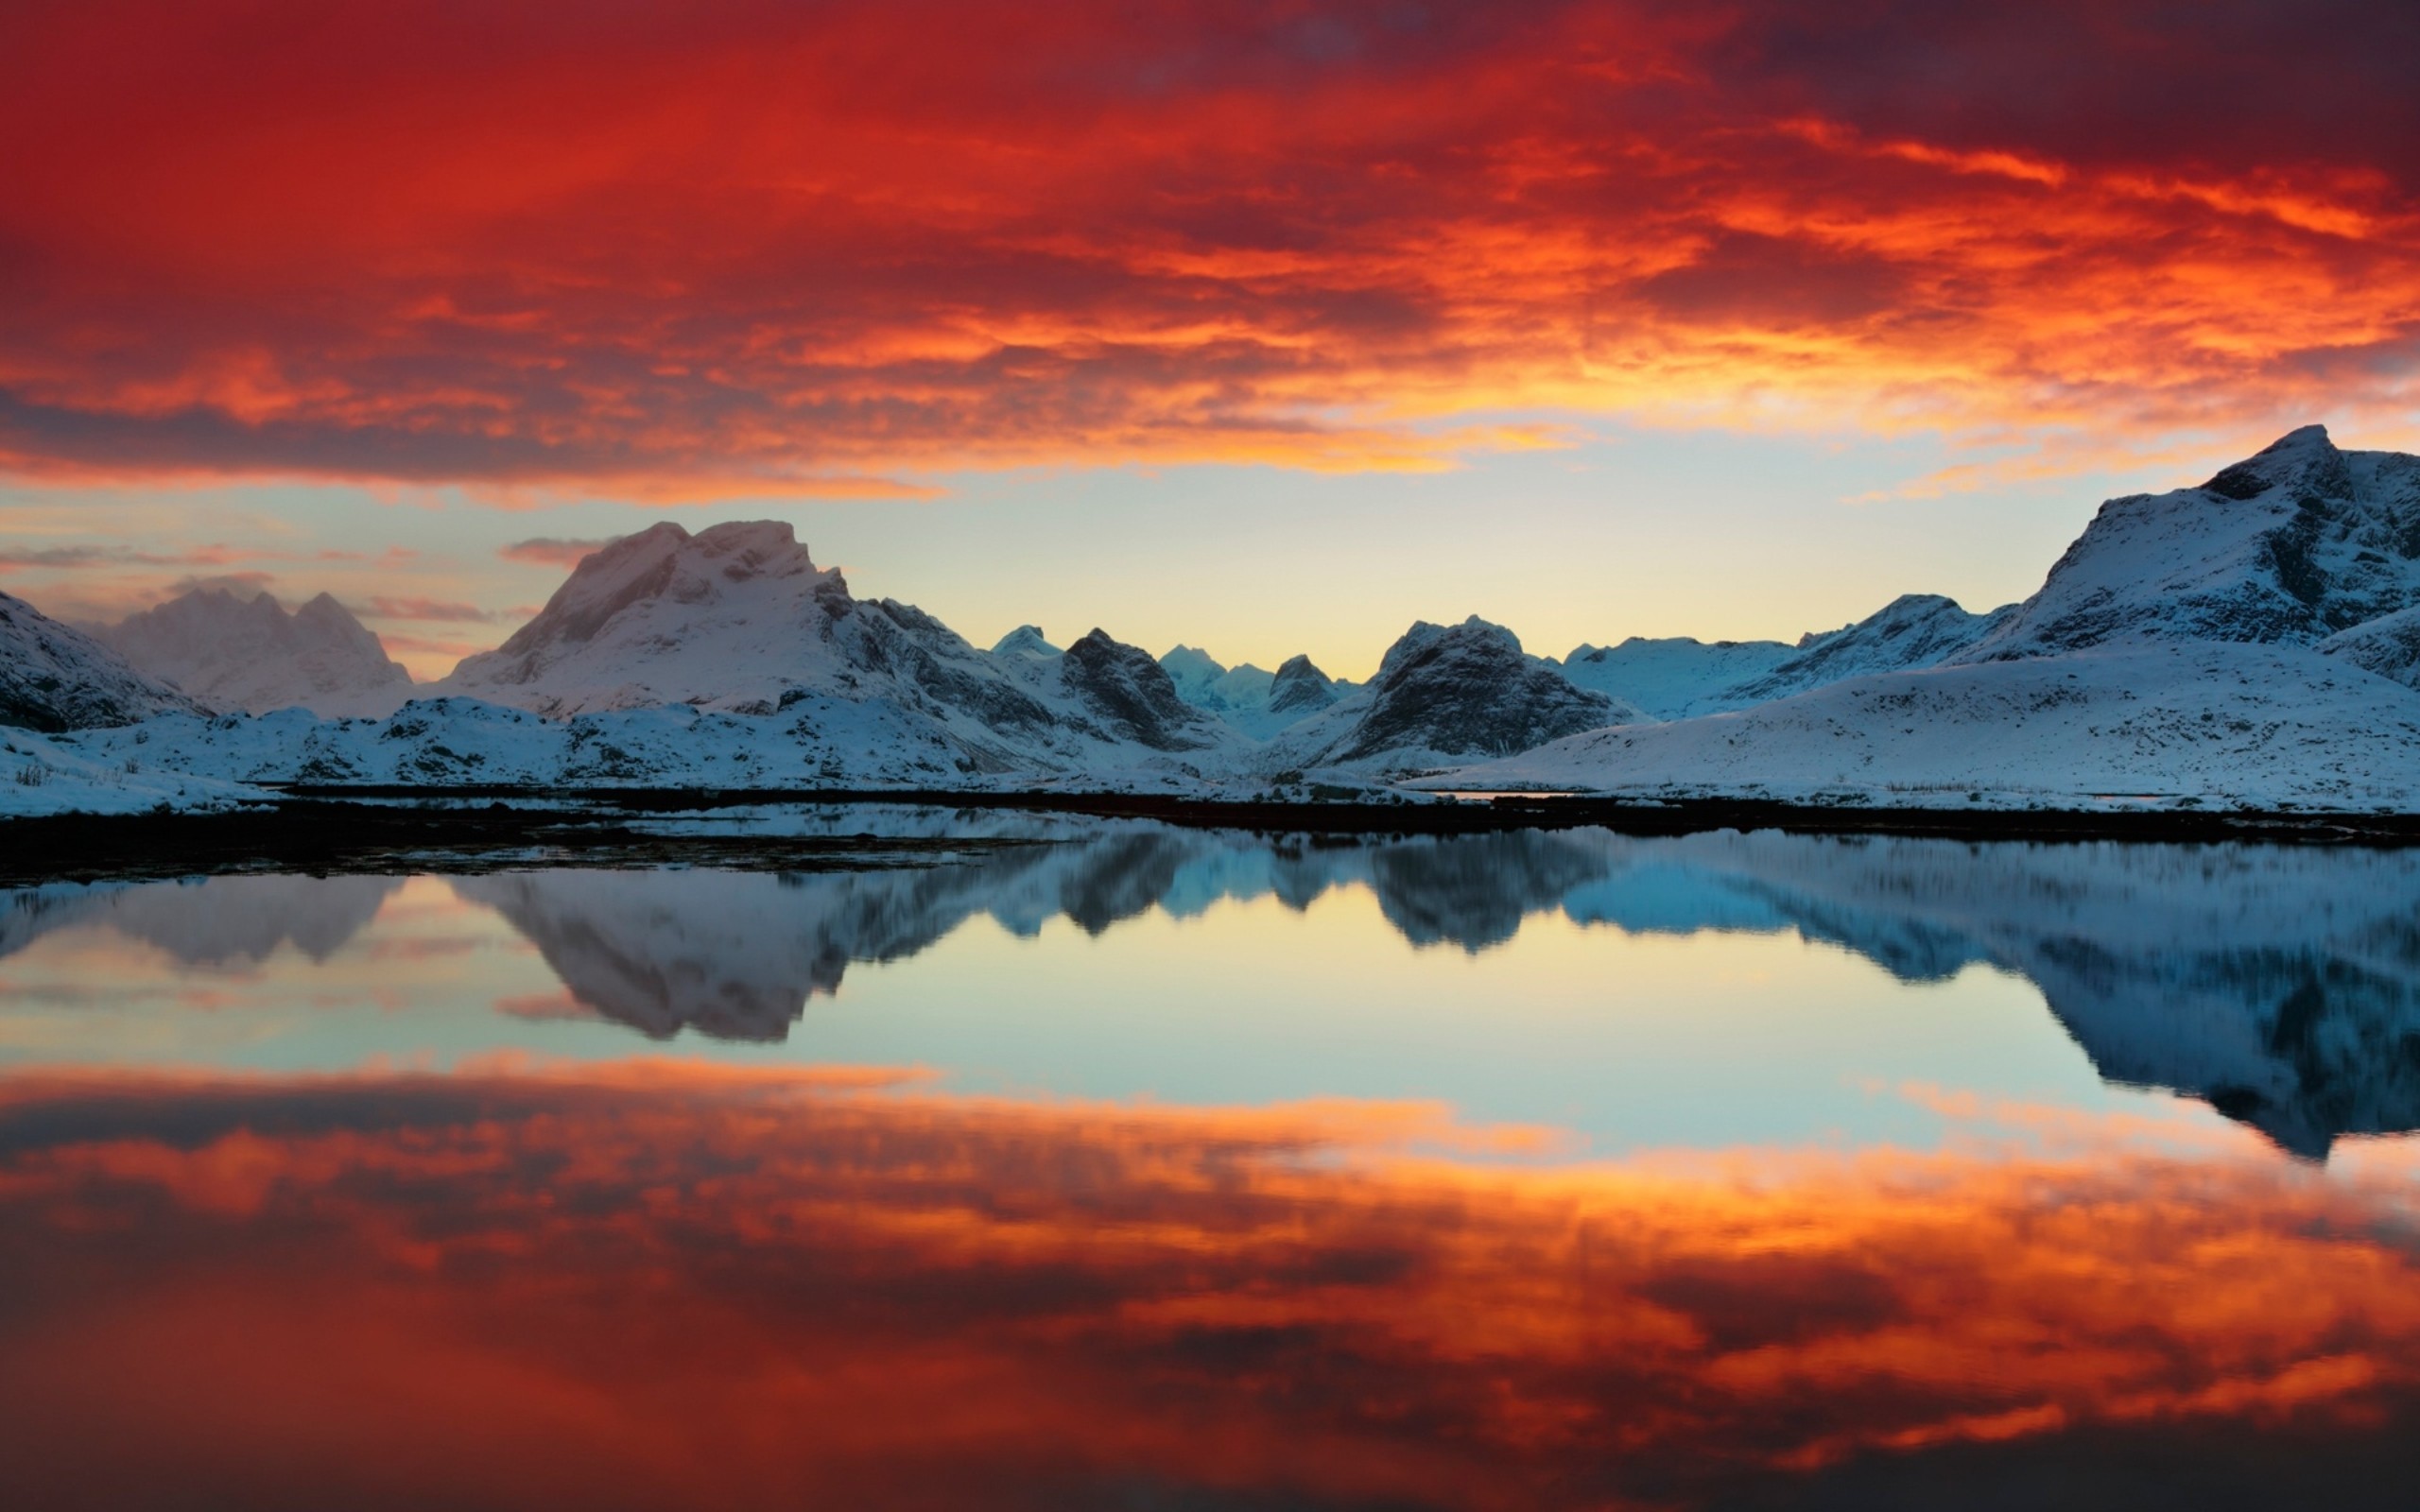 General 2560x1600 nature landscape lake mountains red clouds calm waters sunset reflection sky